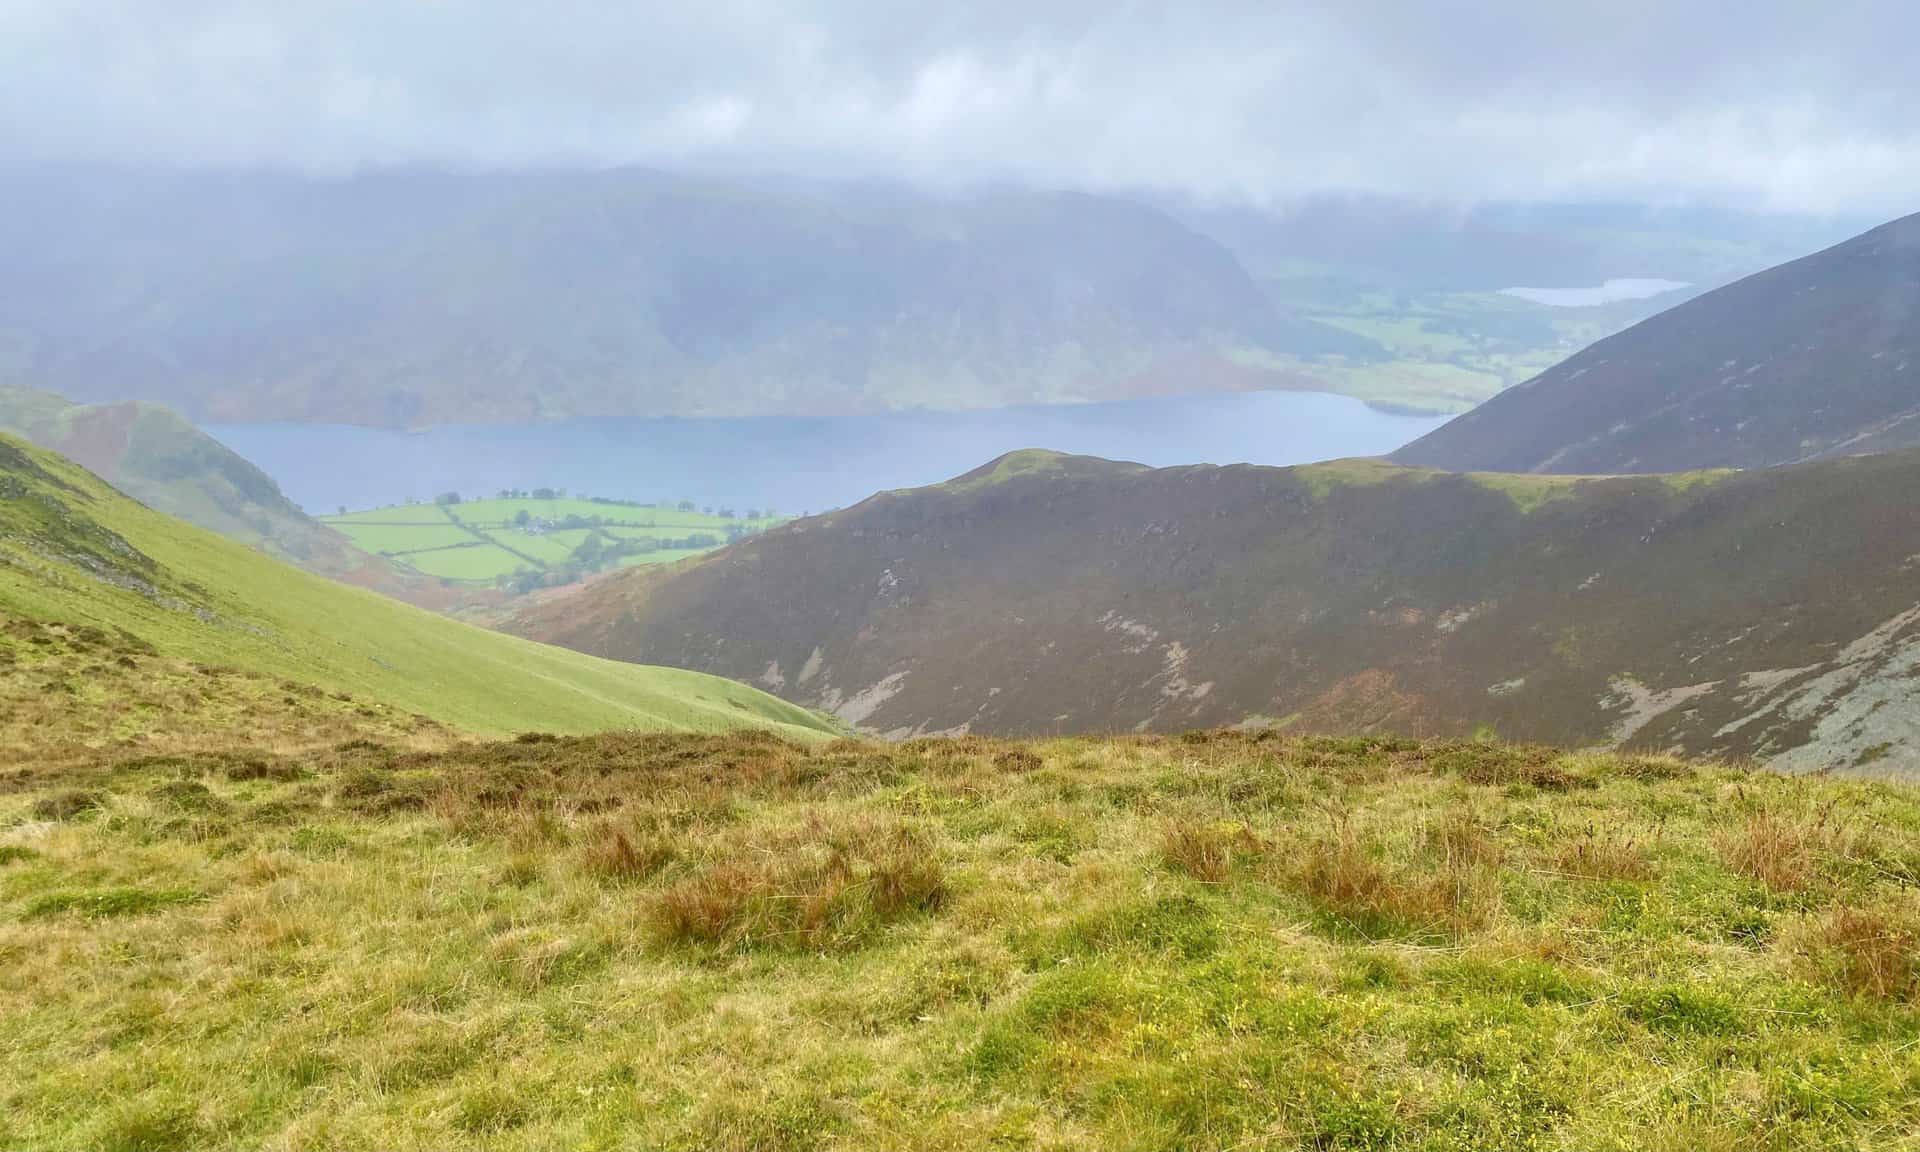 The strong winds blowing over Whiteless Edge momentarily clear the mist to reveal Crummock Water and Mellbreak. Loweswater is also visible in the distance on the right.